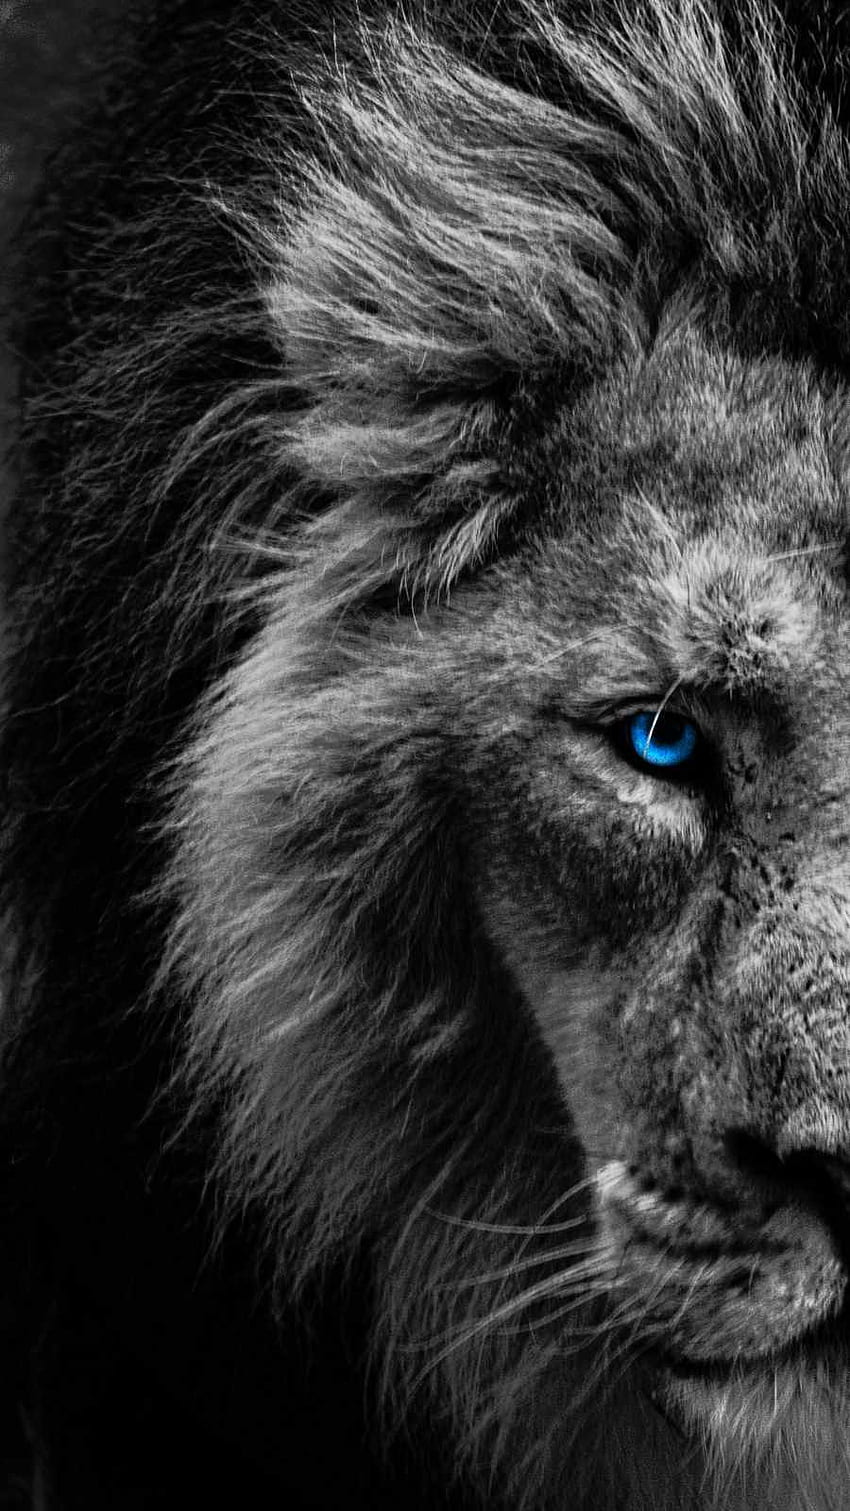 Blue Eye Lion IPhone - IPhone : iPhone , White Lion iPhone HD phone wallpaper